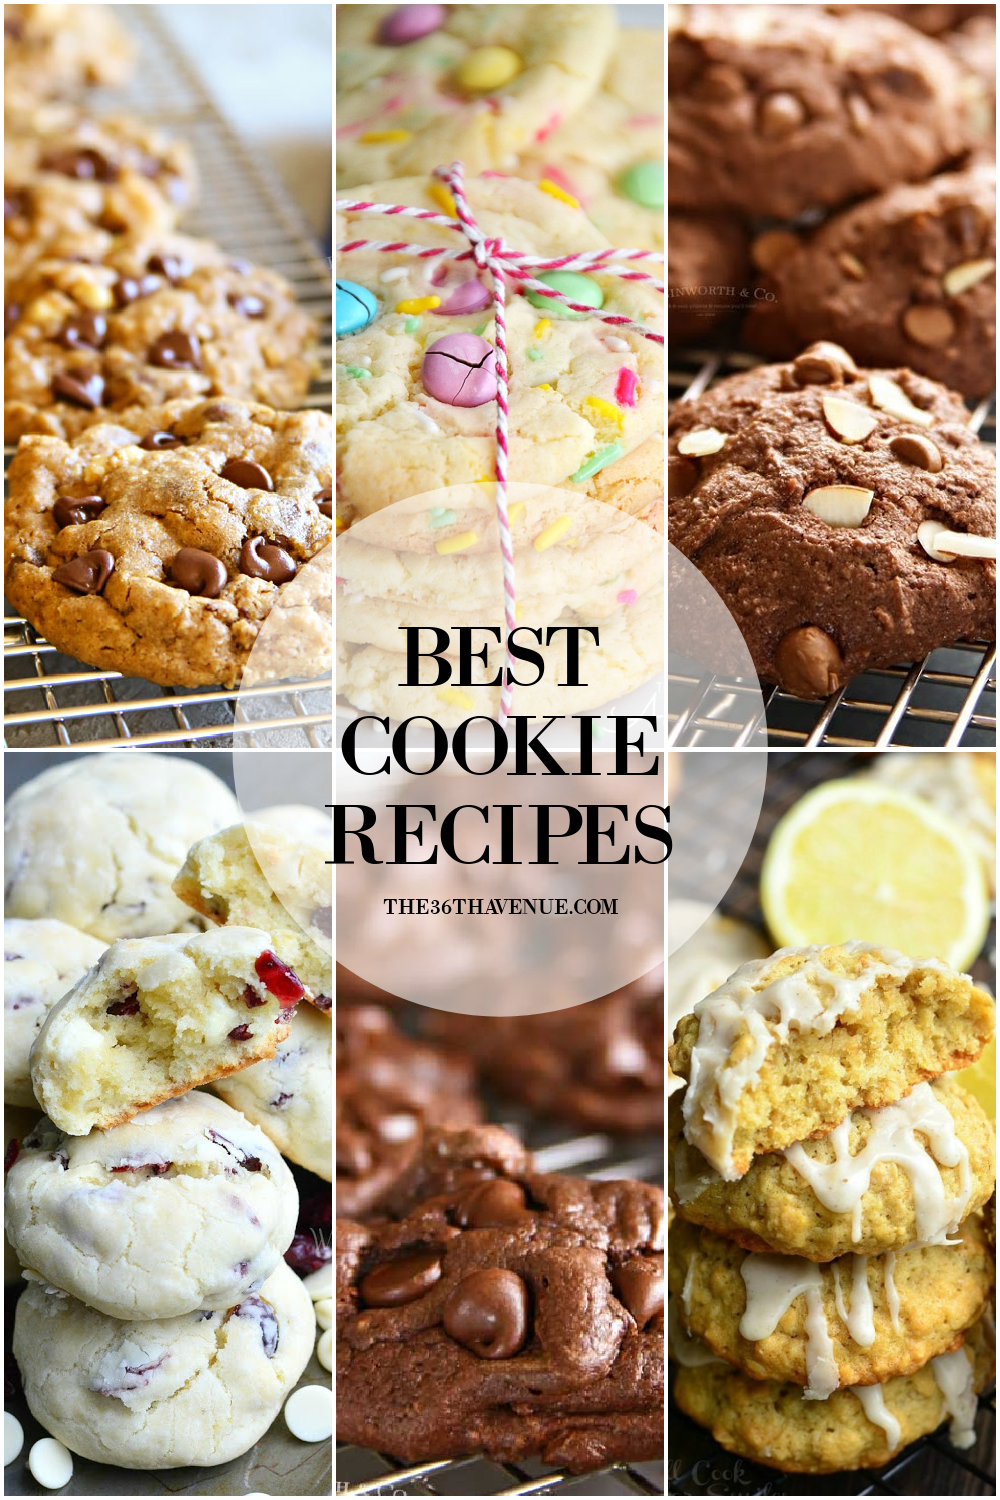 Best Cookie Recipes the36thavenue.com